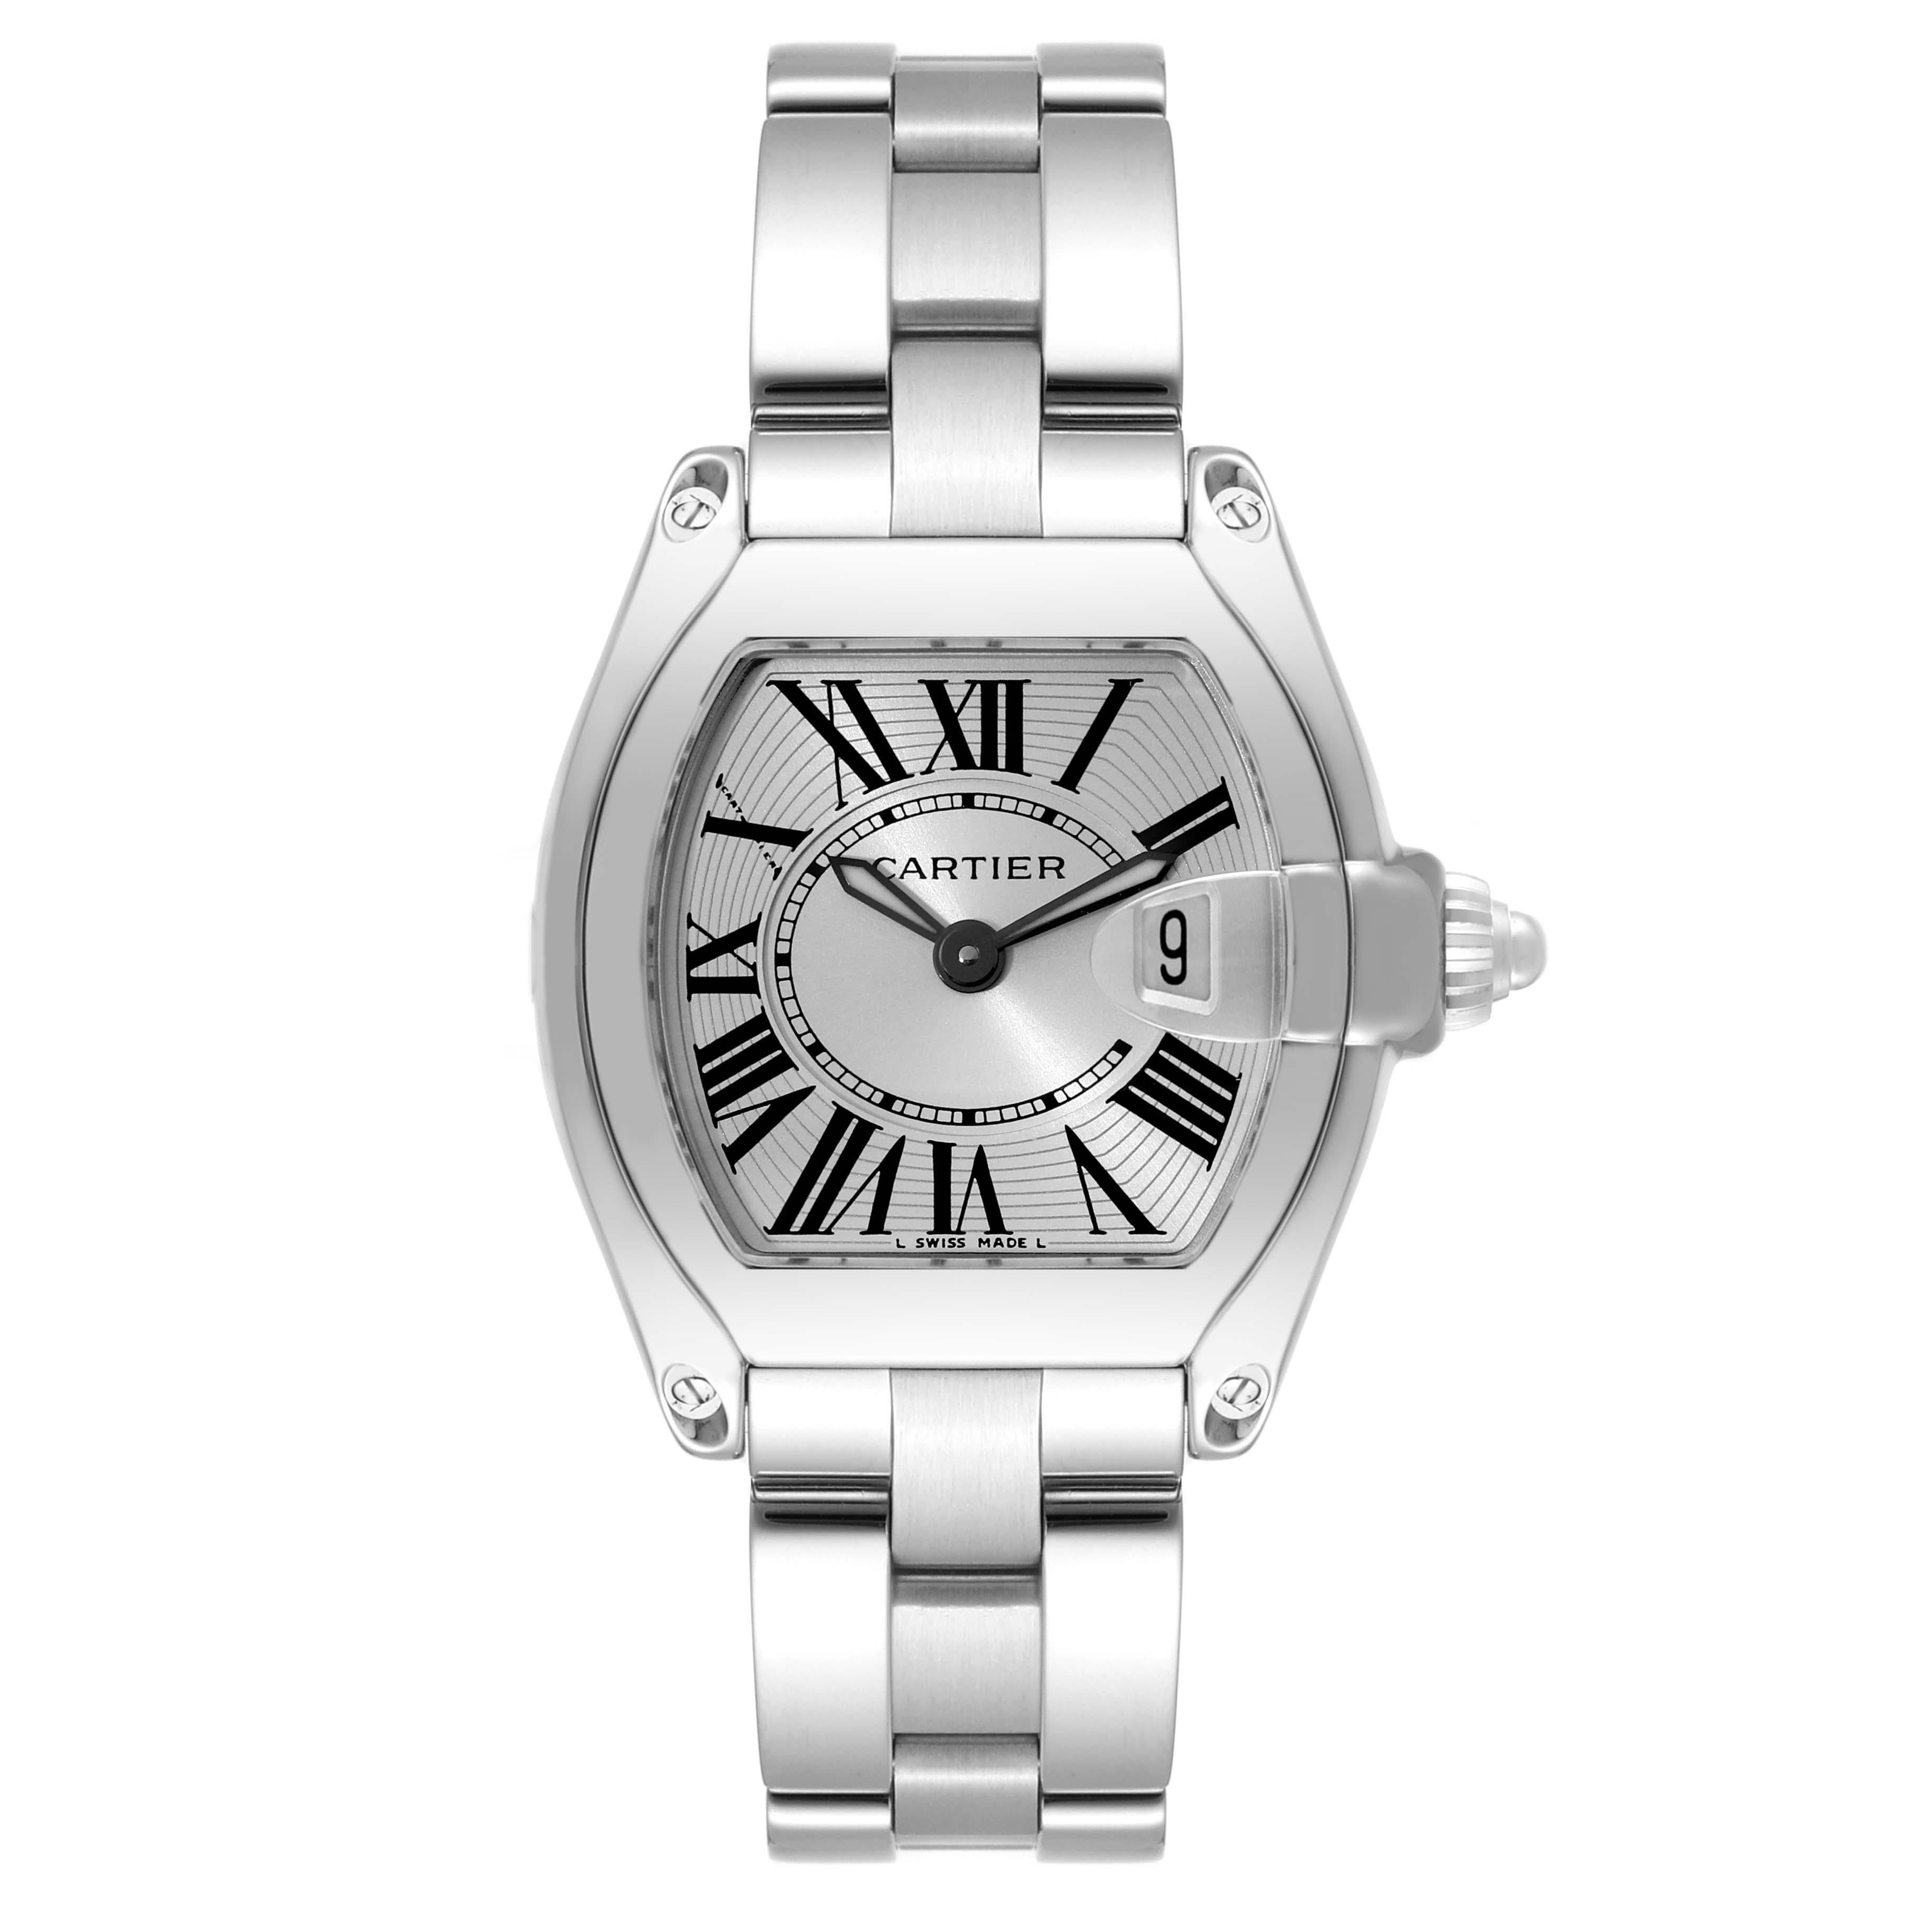 Cartier Roadster Small Silver Dial Steel Ladies Watch W62016V3. Swiss quartz movement calibre 688. Stainless steel tonneau shaped case 36 x 30 mm. . Scratch resistant sapphire crystal with cyclops magnifier. Silver sunray effect dial with black